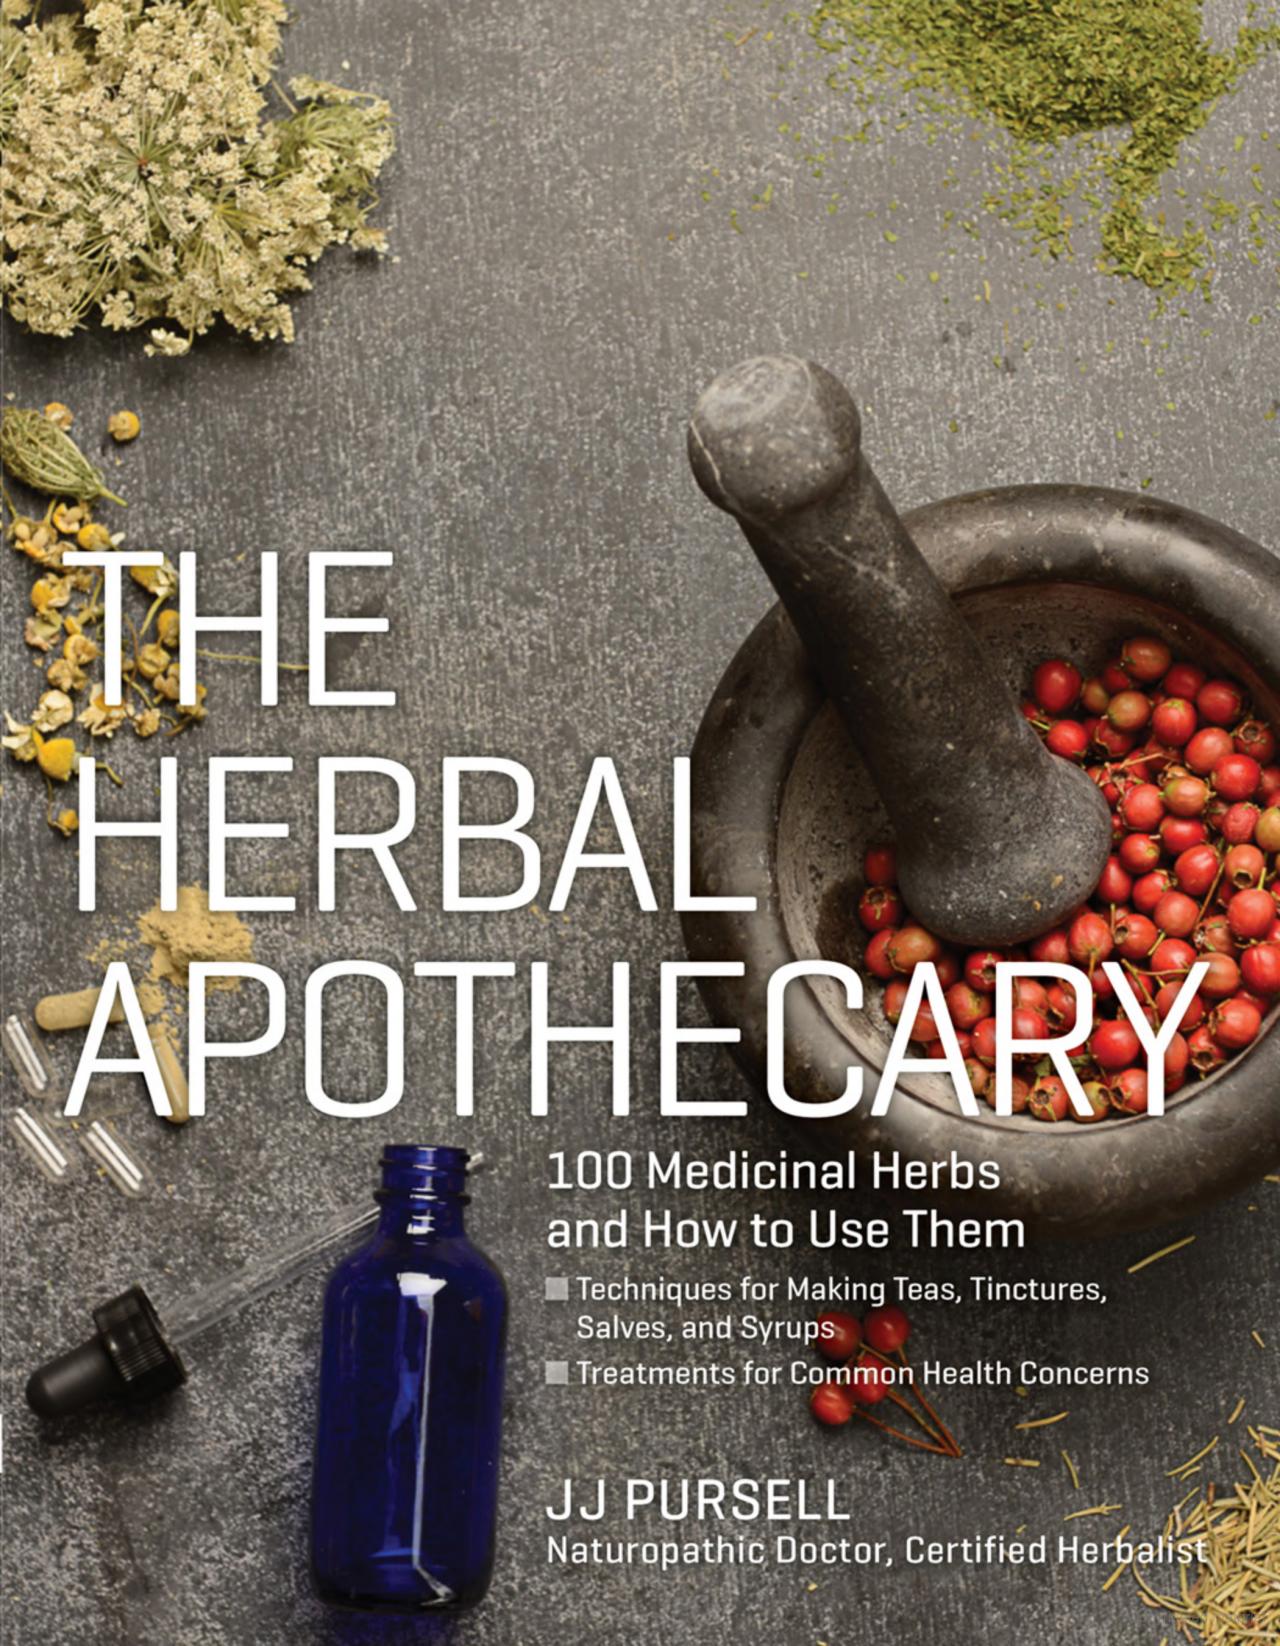 The Herbal Apothecary: 100 Medicinal Herbs and How to Use Them by JJ Purcell